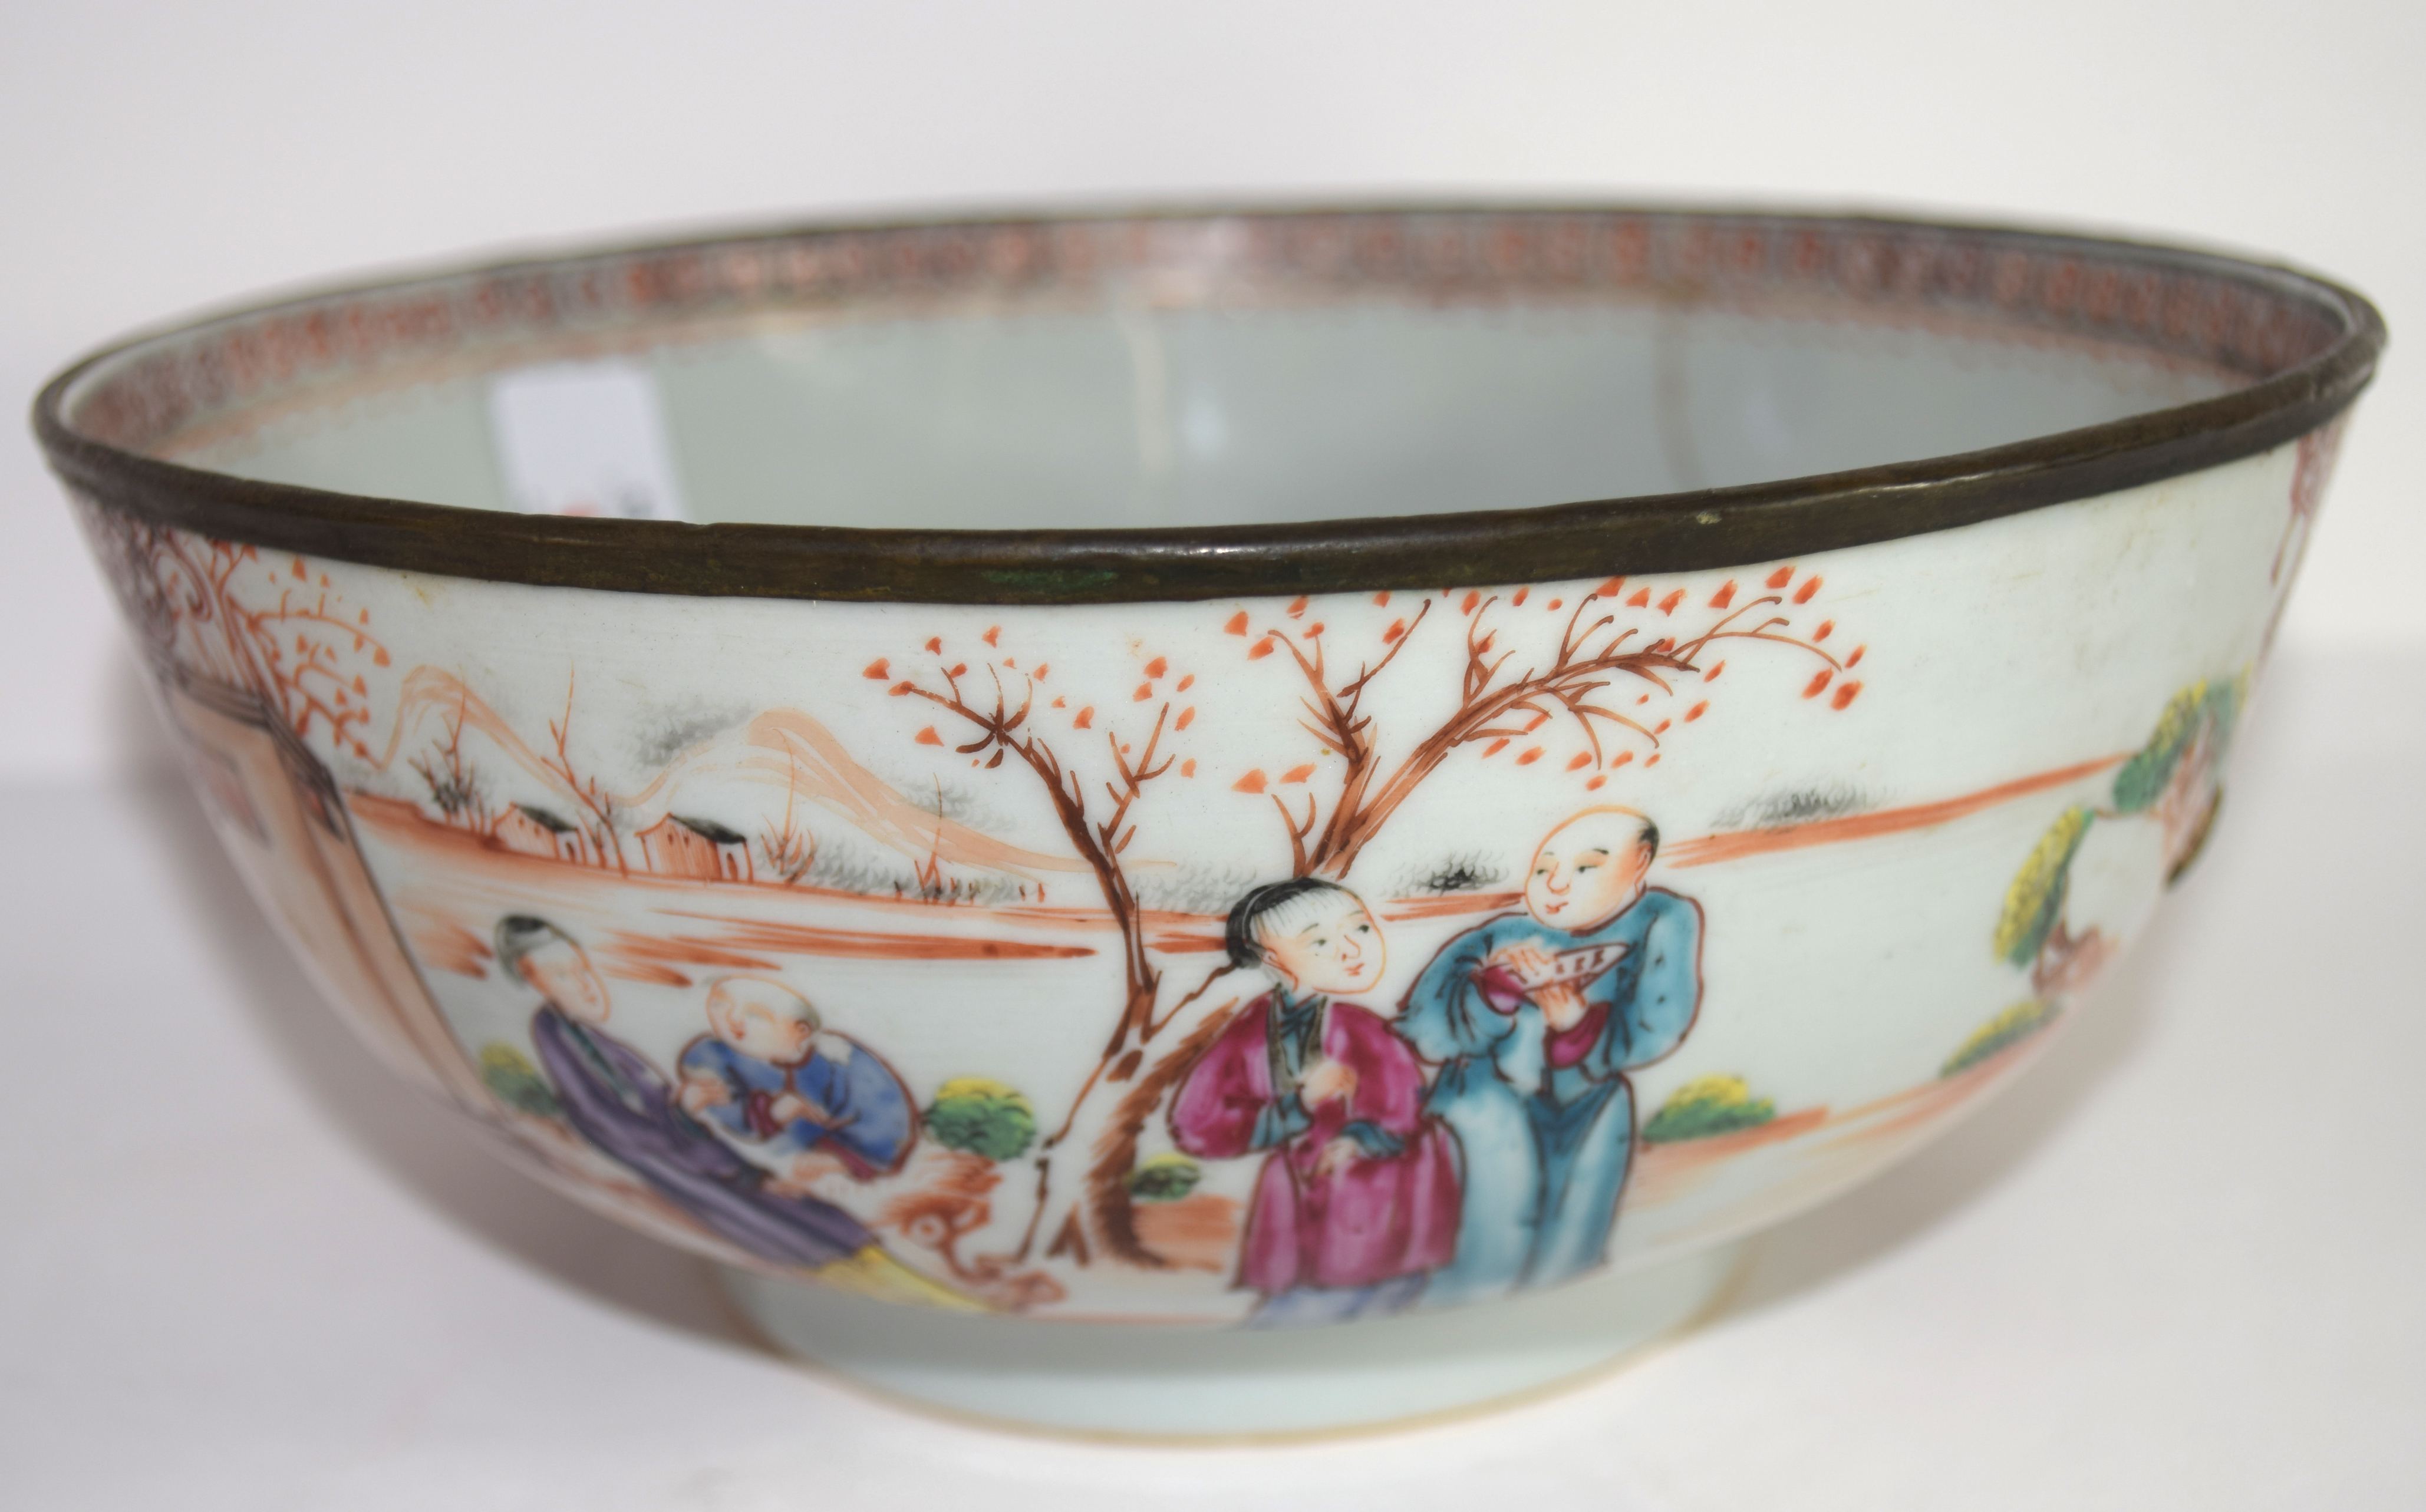 18th century Chinese porcelain bowl decorated in polychrome with Chinese figures, 20cm diam (old - Image 2 of 2